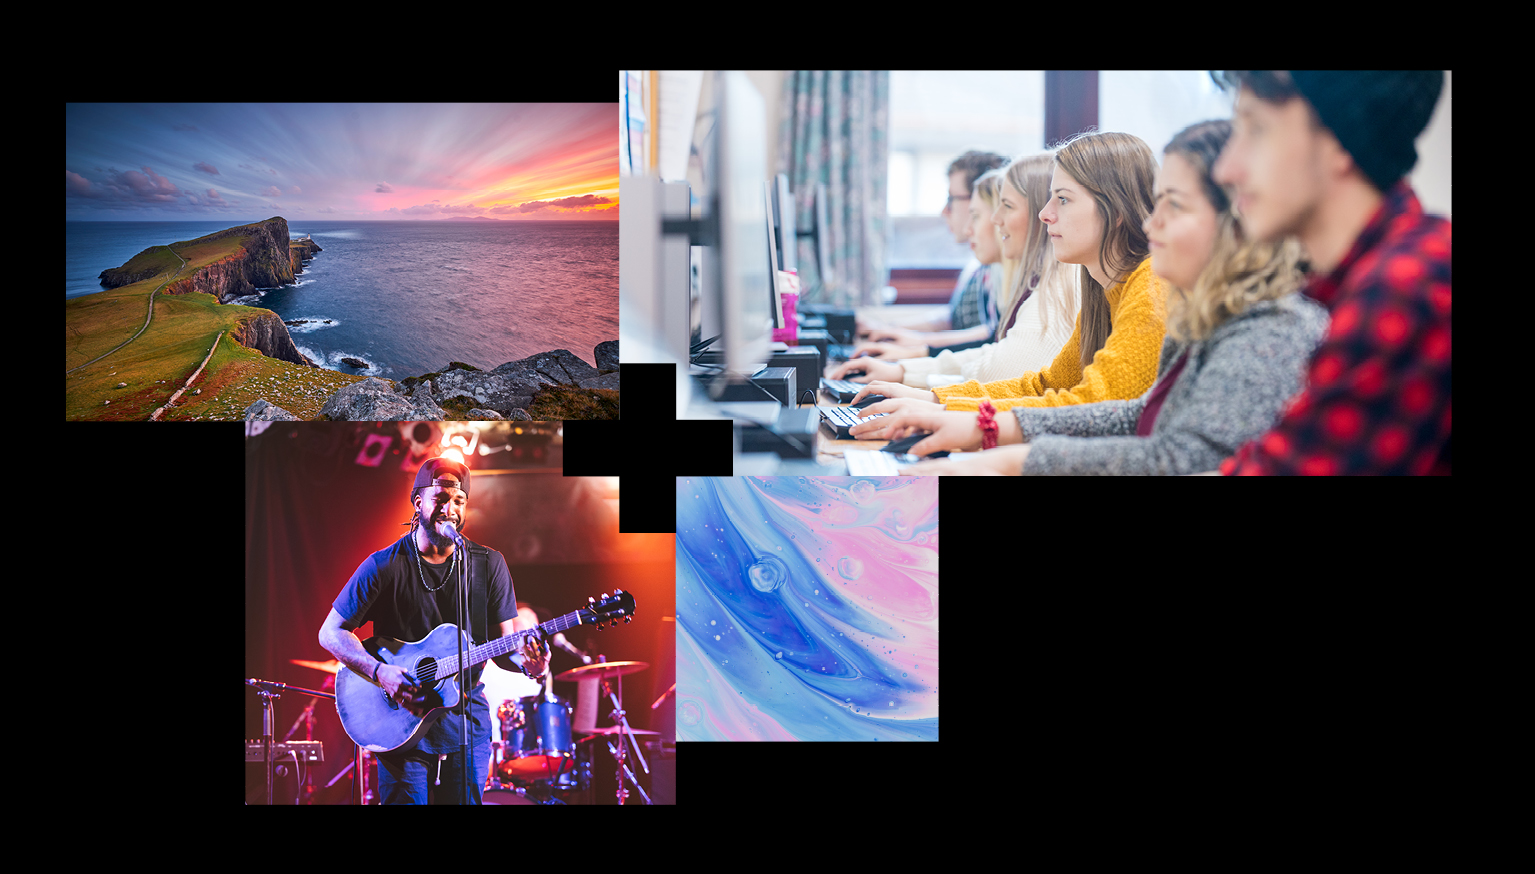 Four pictures connected with the visual identity plus sign. Edge of island with sunset view, group of people looking at computer screens, man singing with guitar, pink and blue swirl bubbles